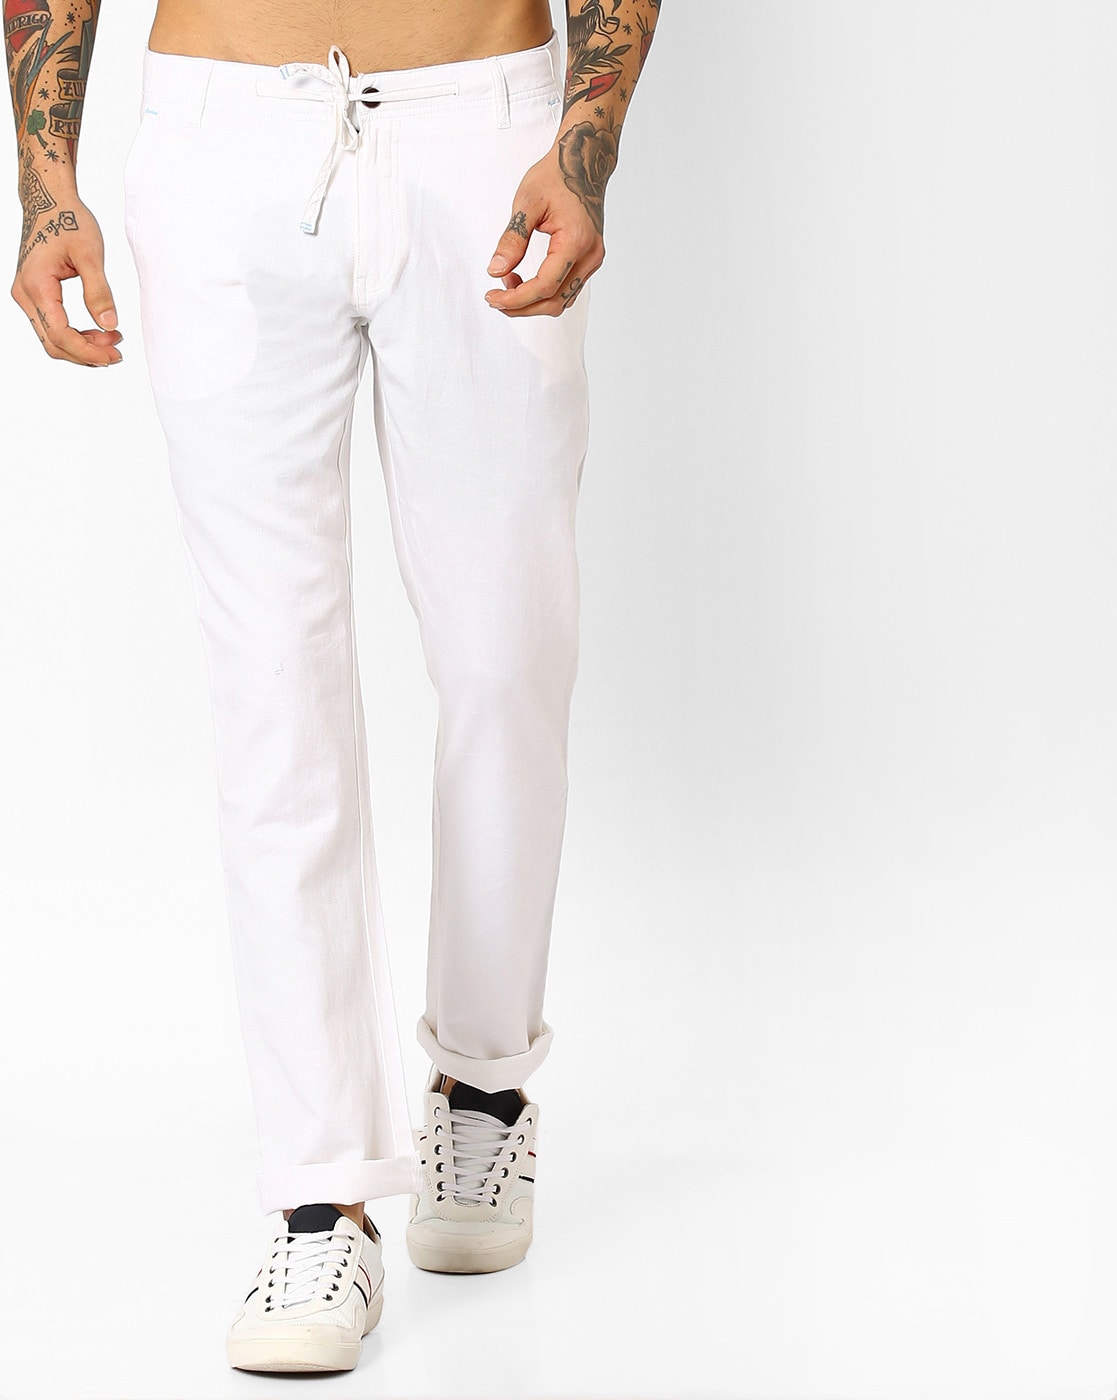 COTTONLINEN TROUSERS  LIMITED EDITION  White  ZARA India